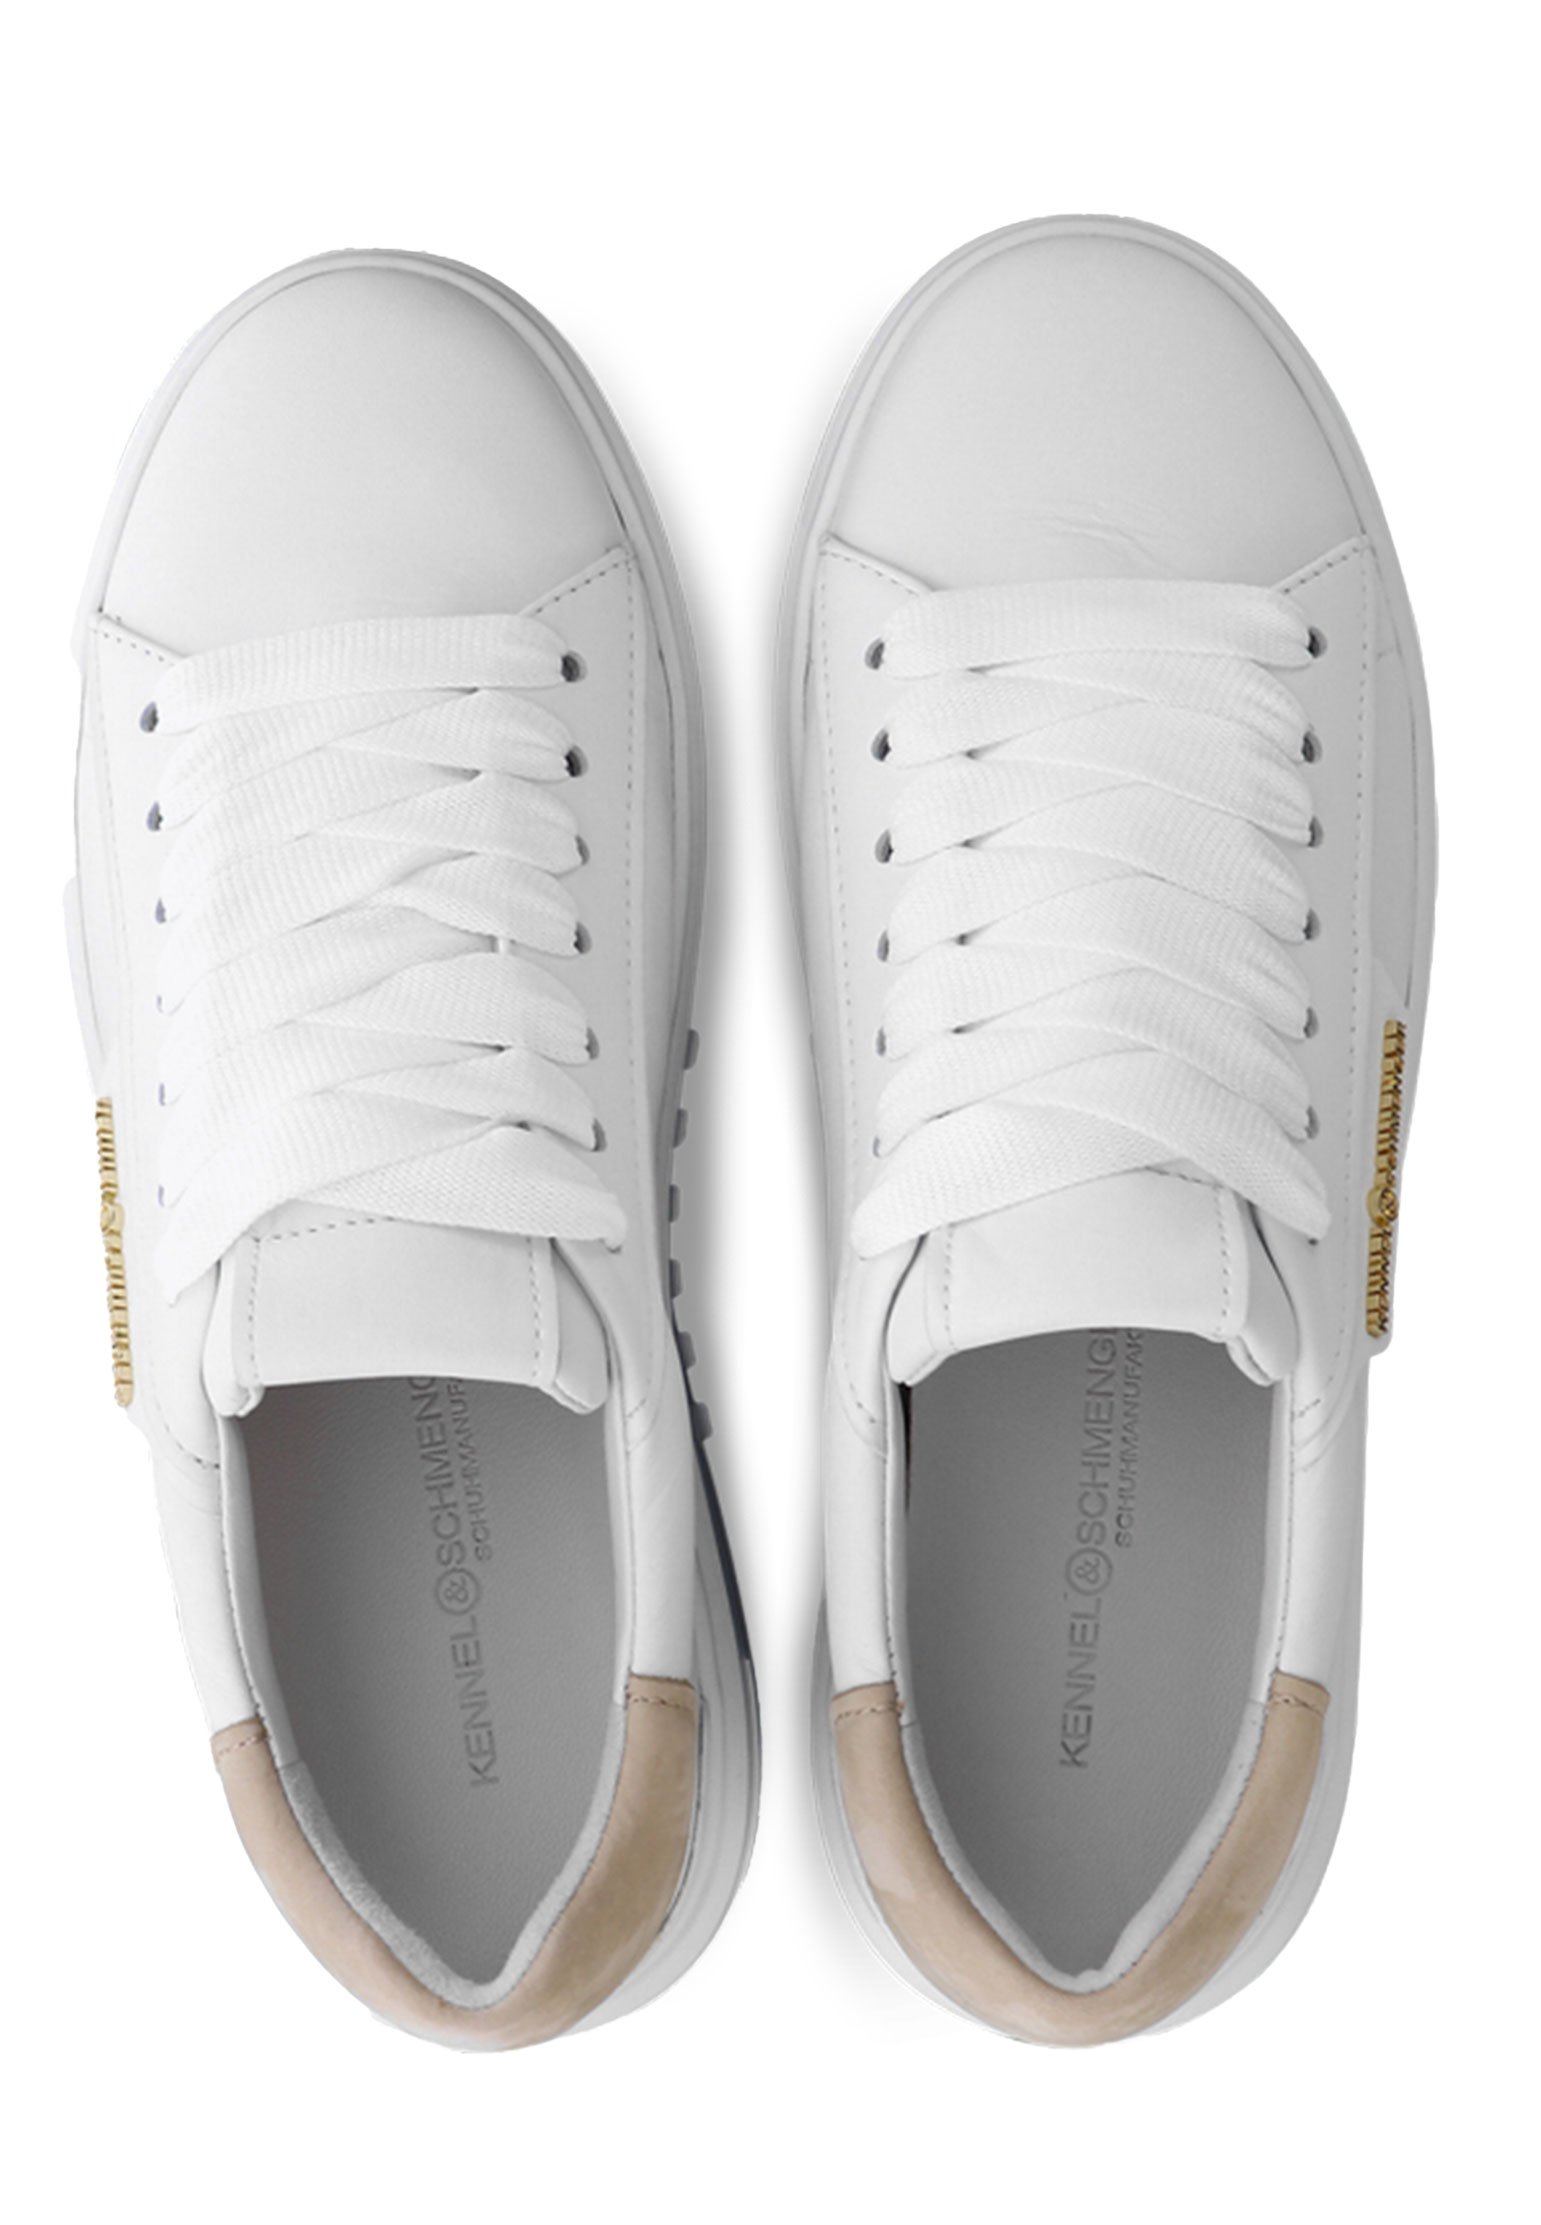 Sneakers KENNEL&SCHMENGER Color: white (Code: 4160) in online store Allure